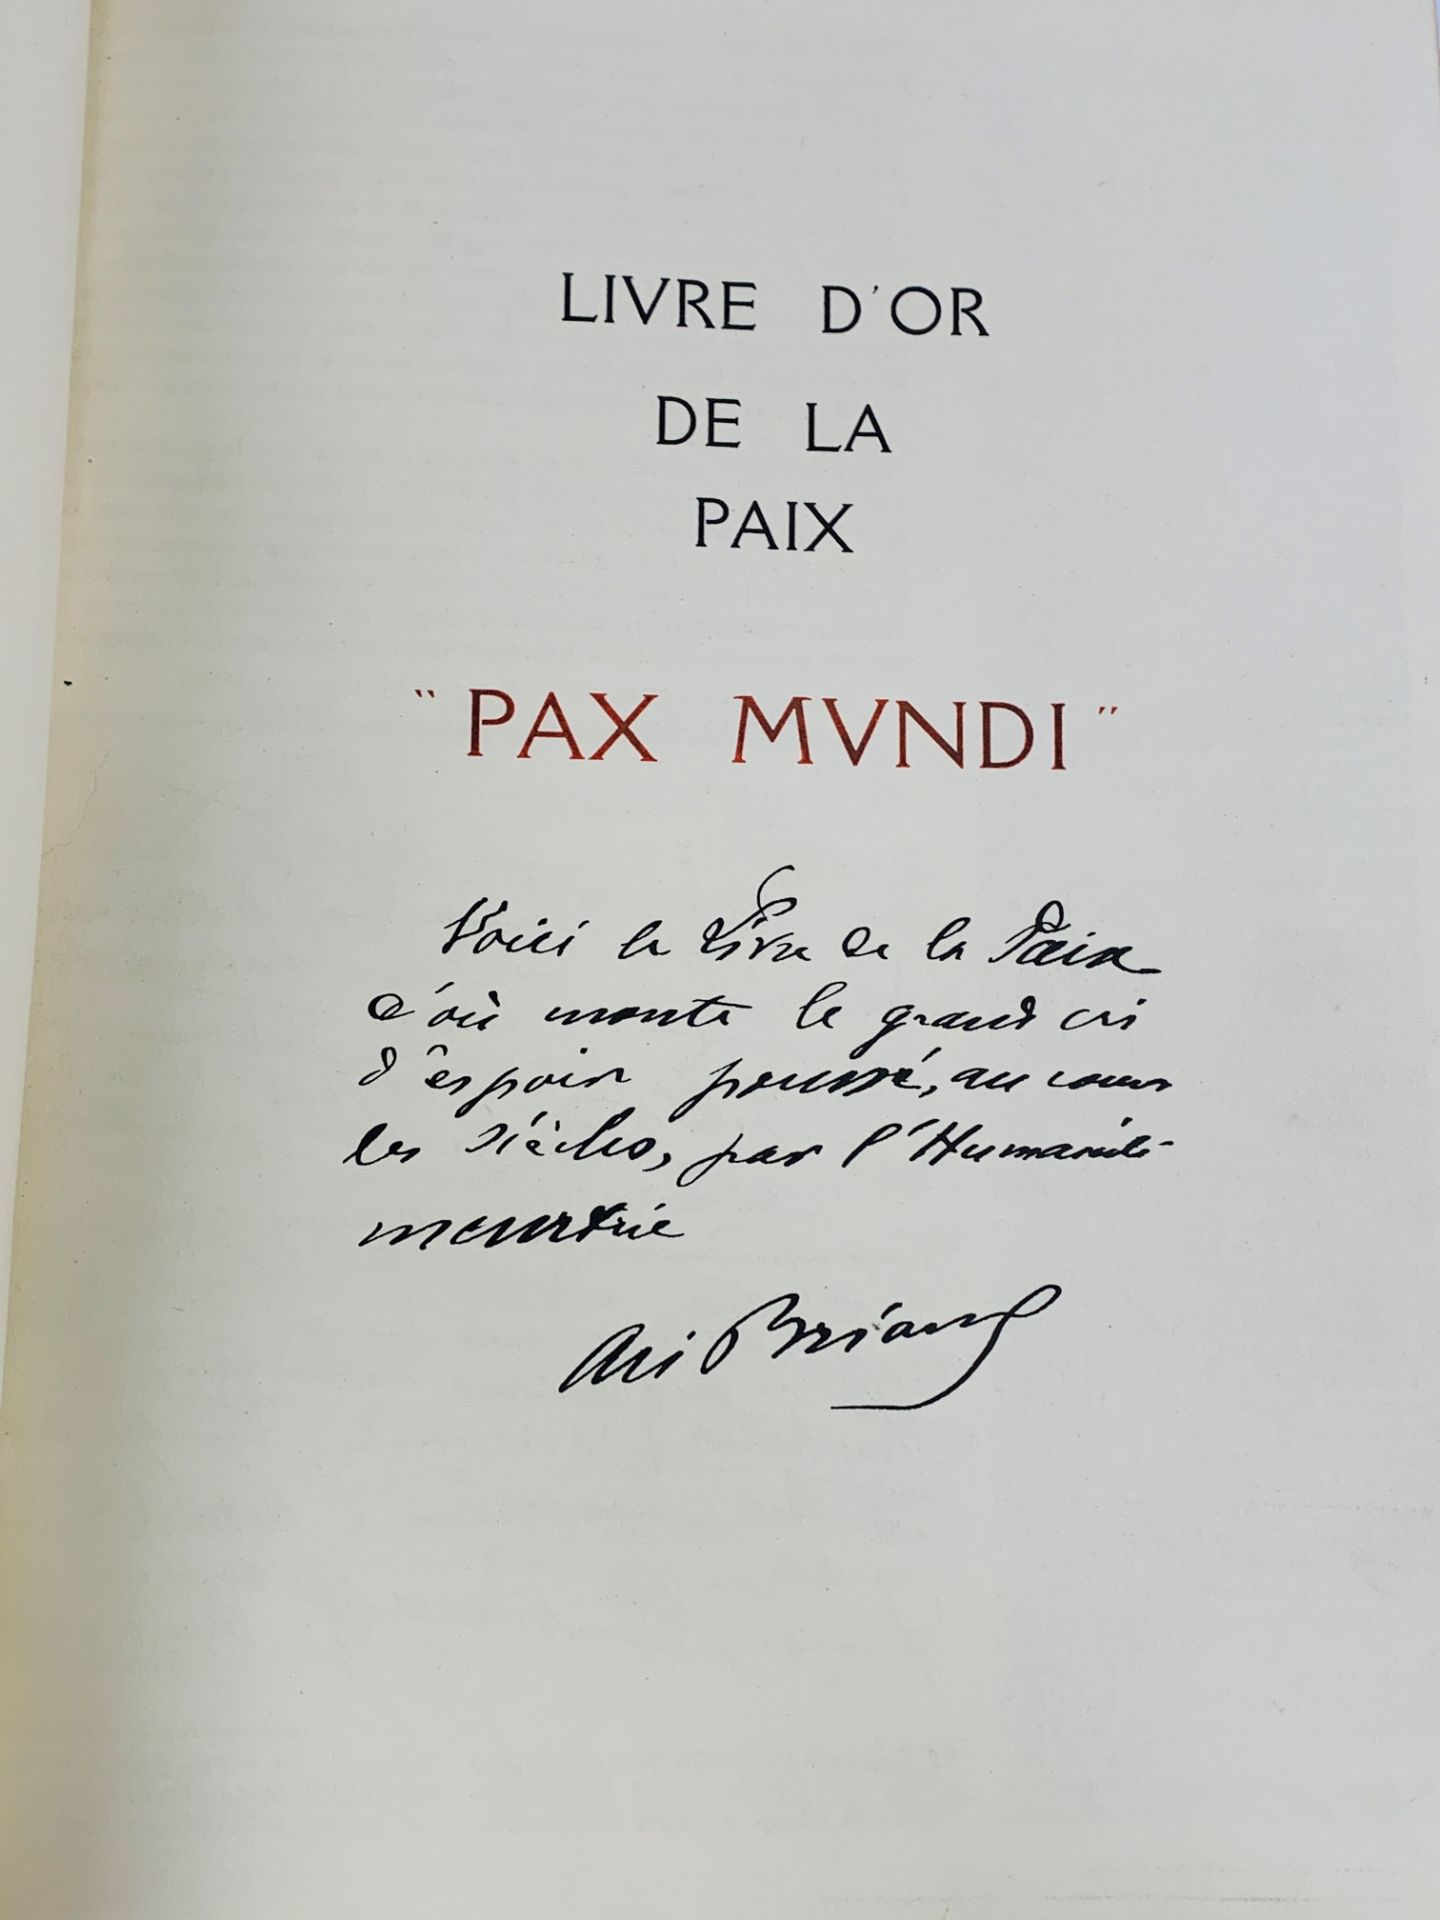 Pax Mundi-Livre D'Or de la Paix: large folio volume created for the society of nations in 1932. - Image 5 of 5